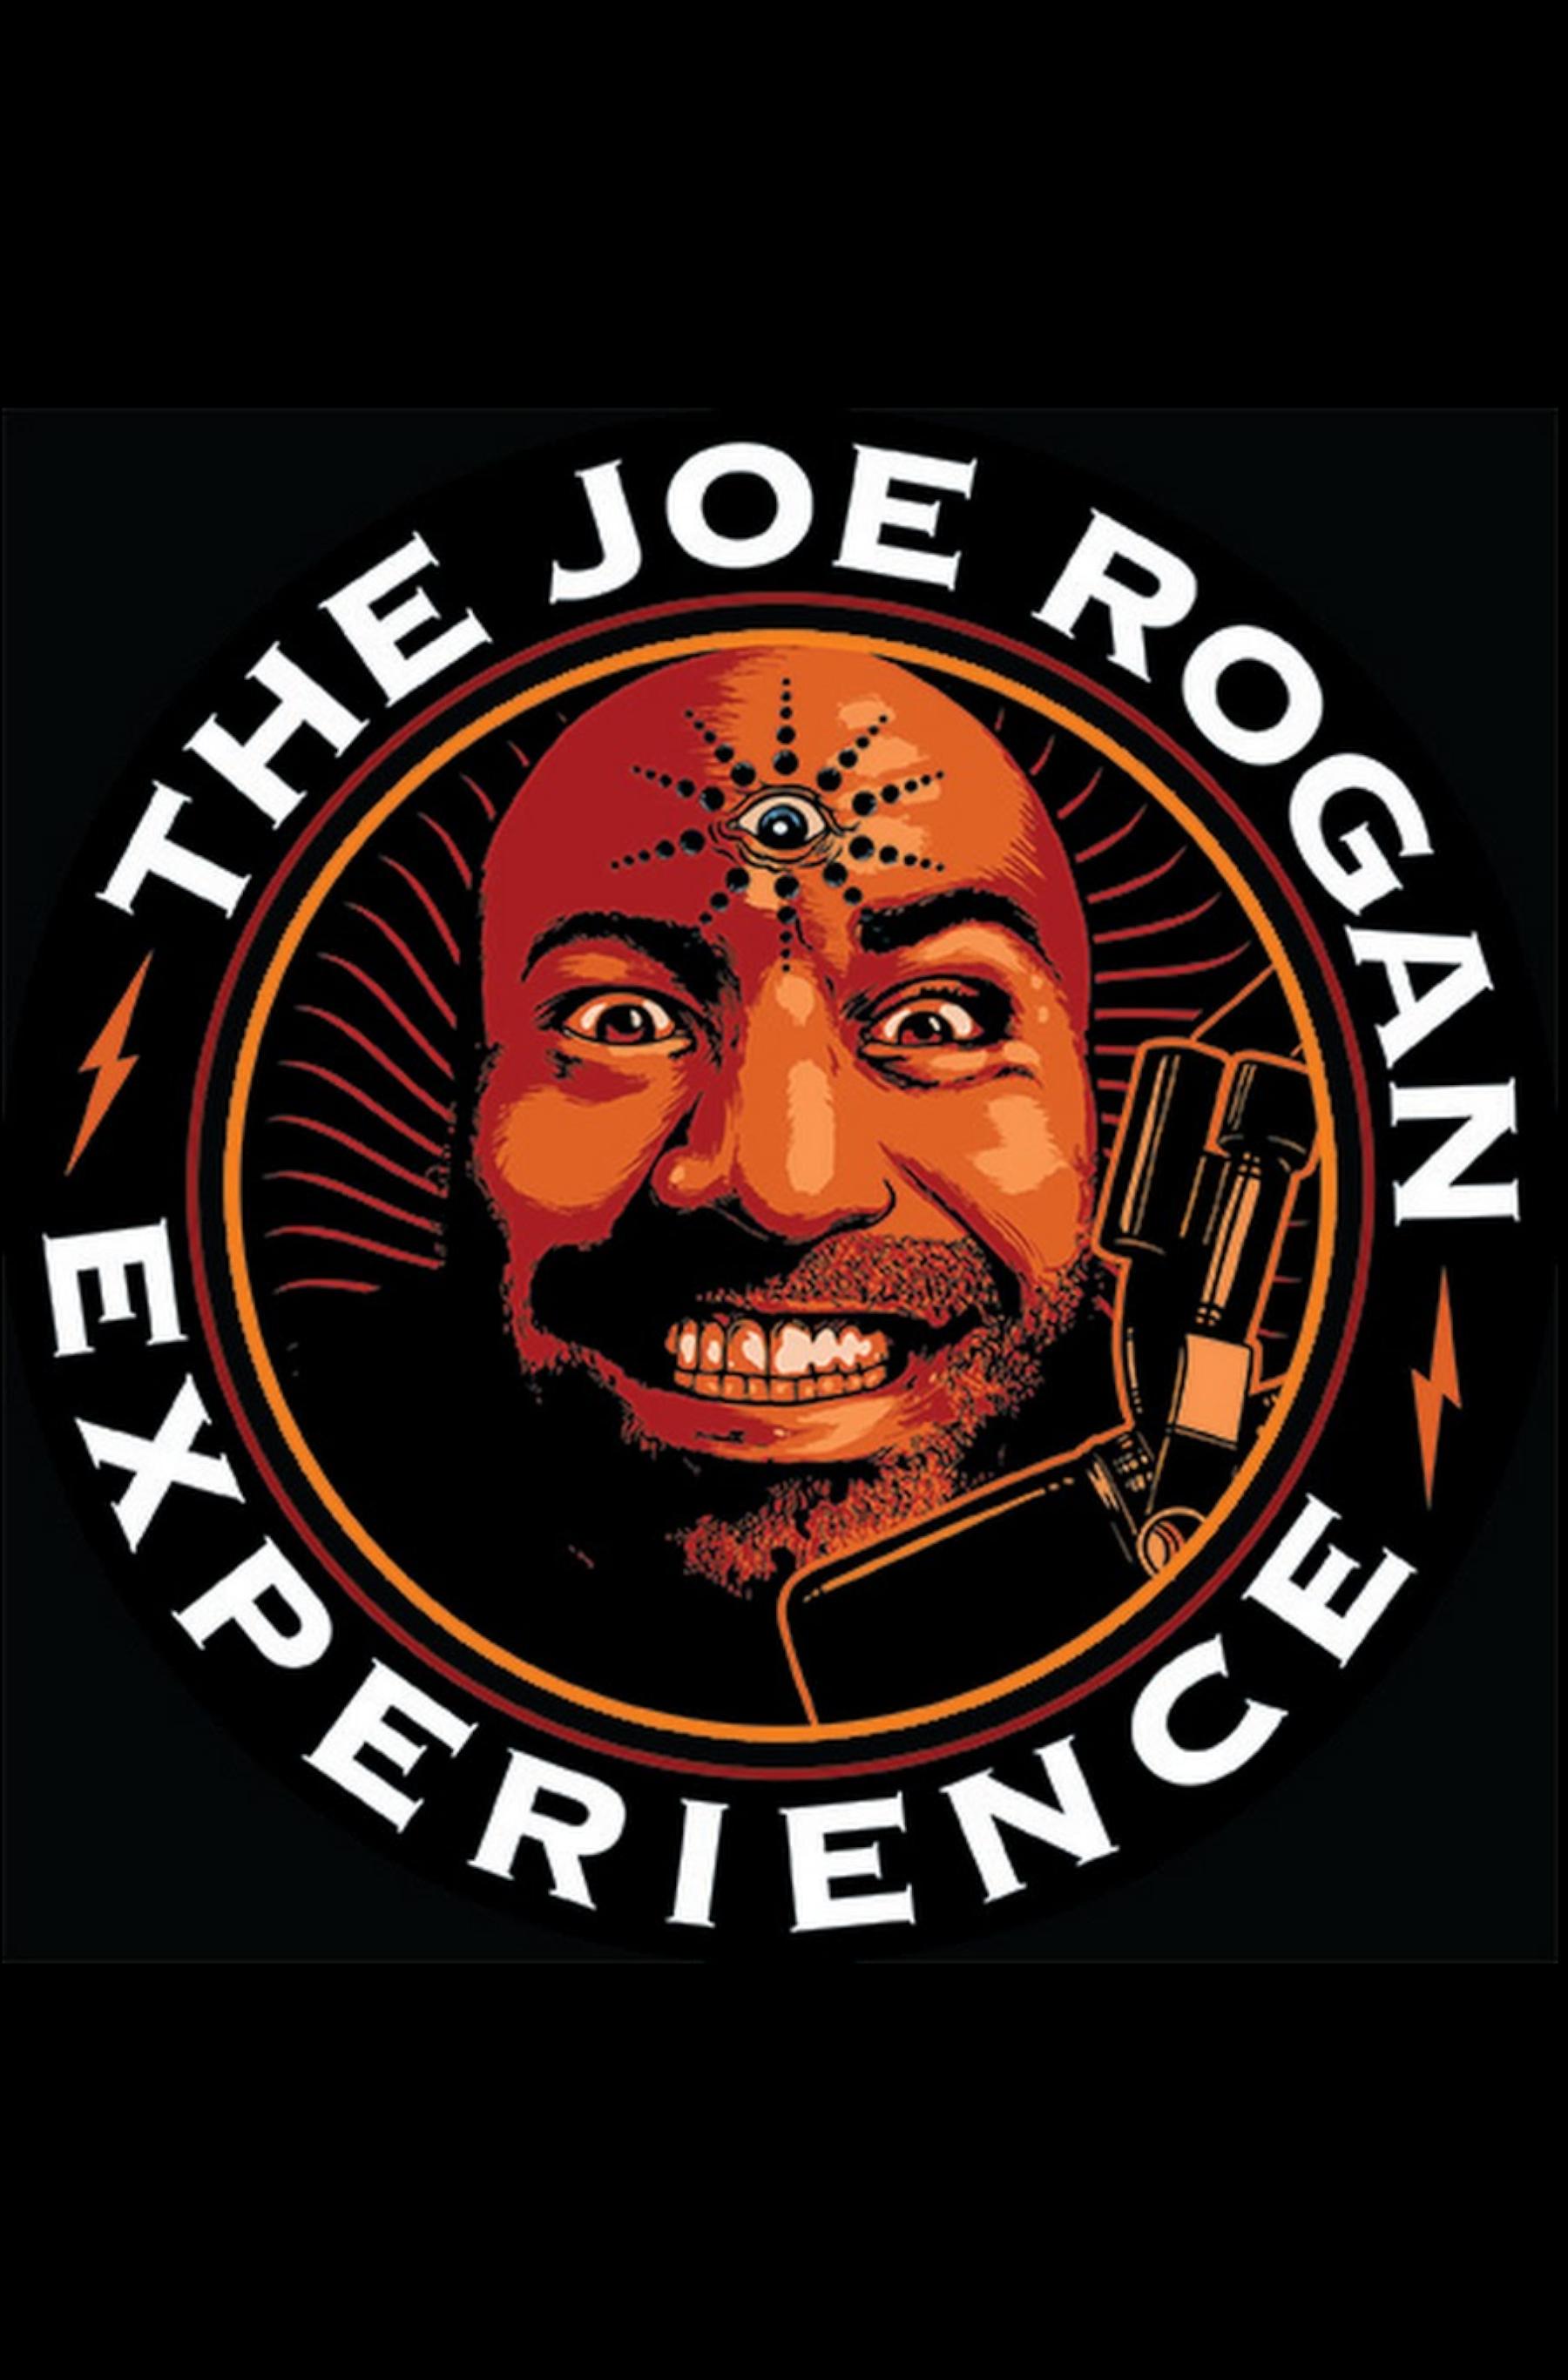 Ep. 252 How the west was won by Joe Rogan and friends